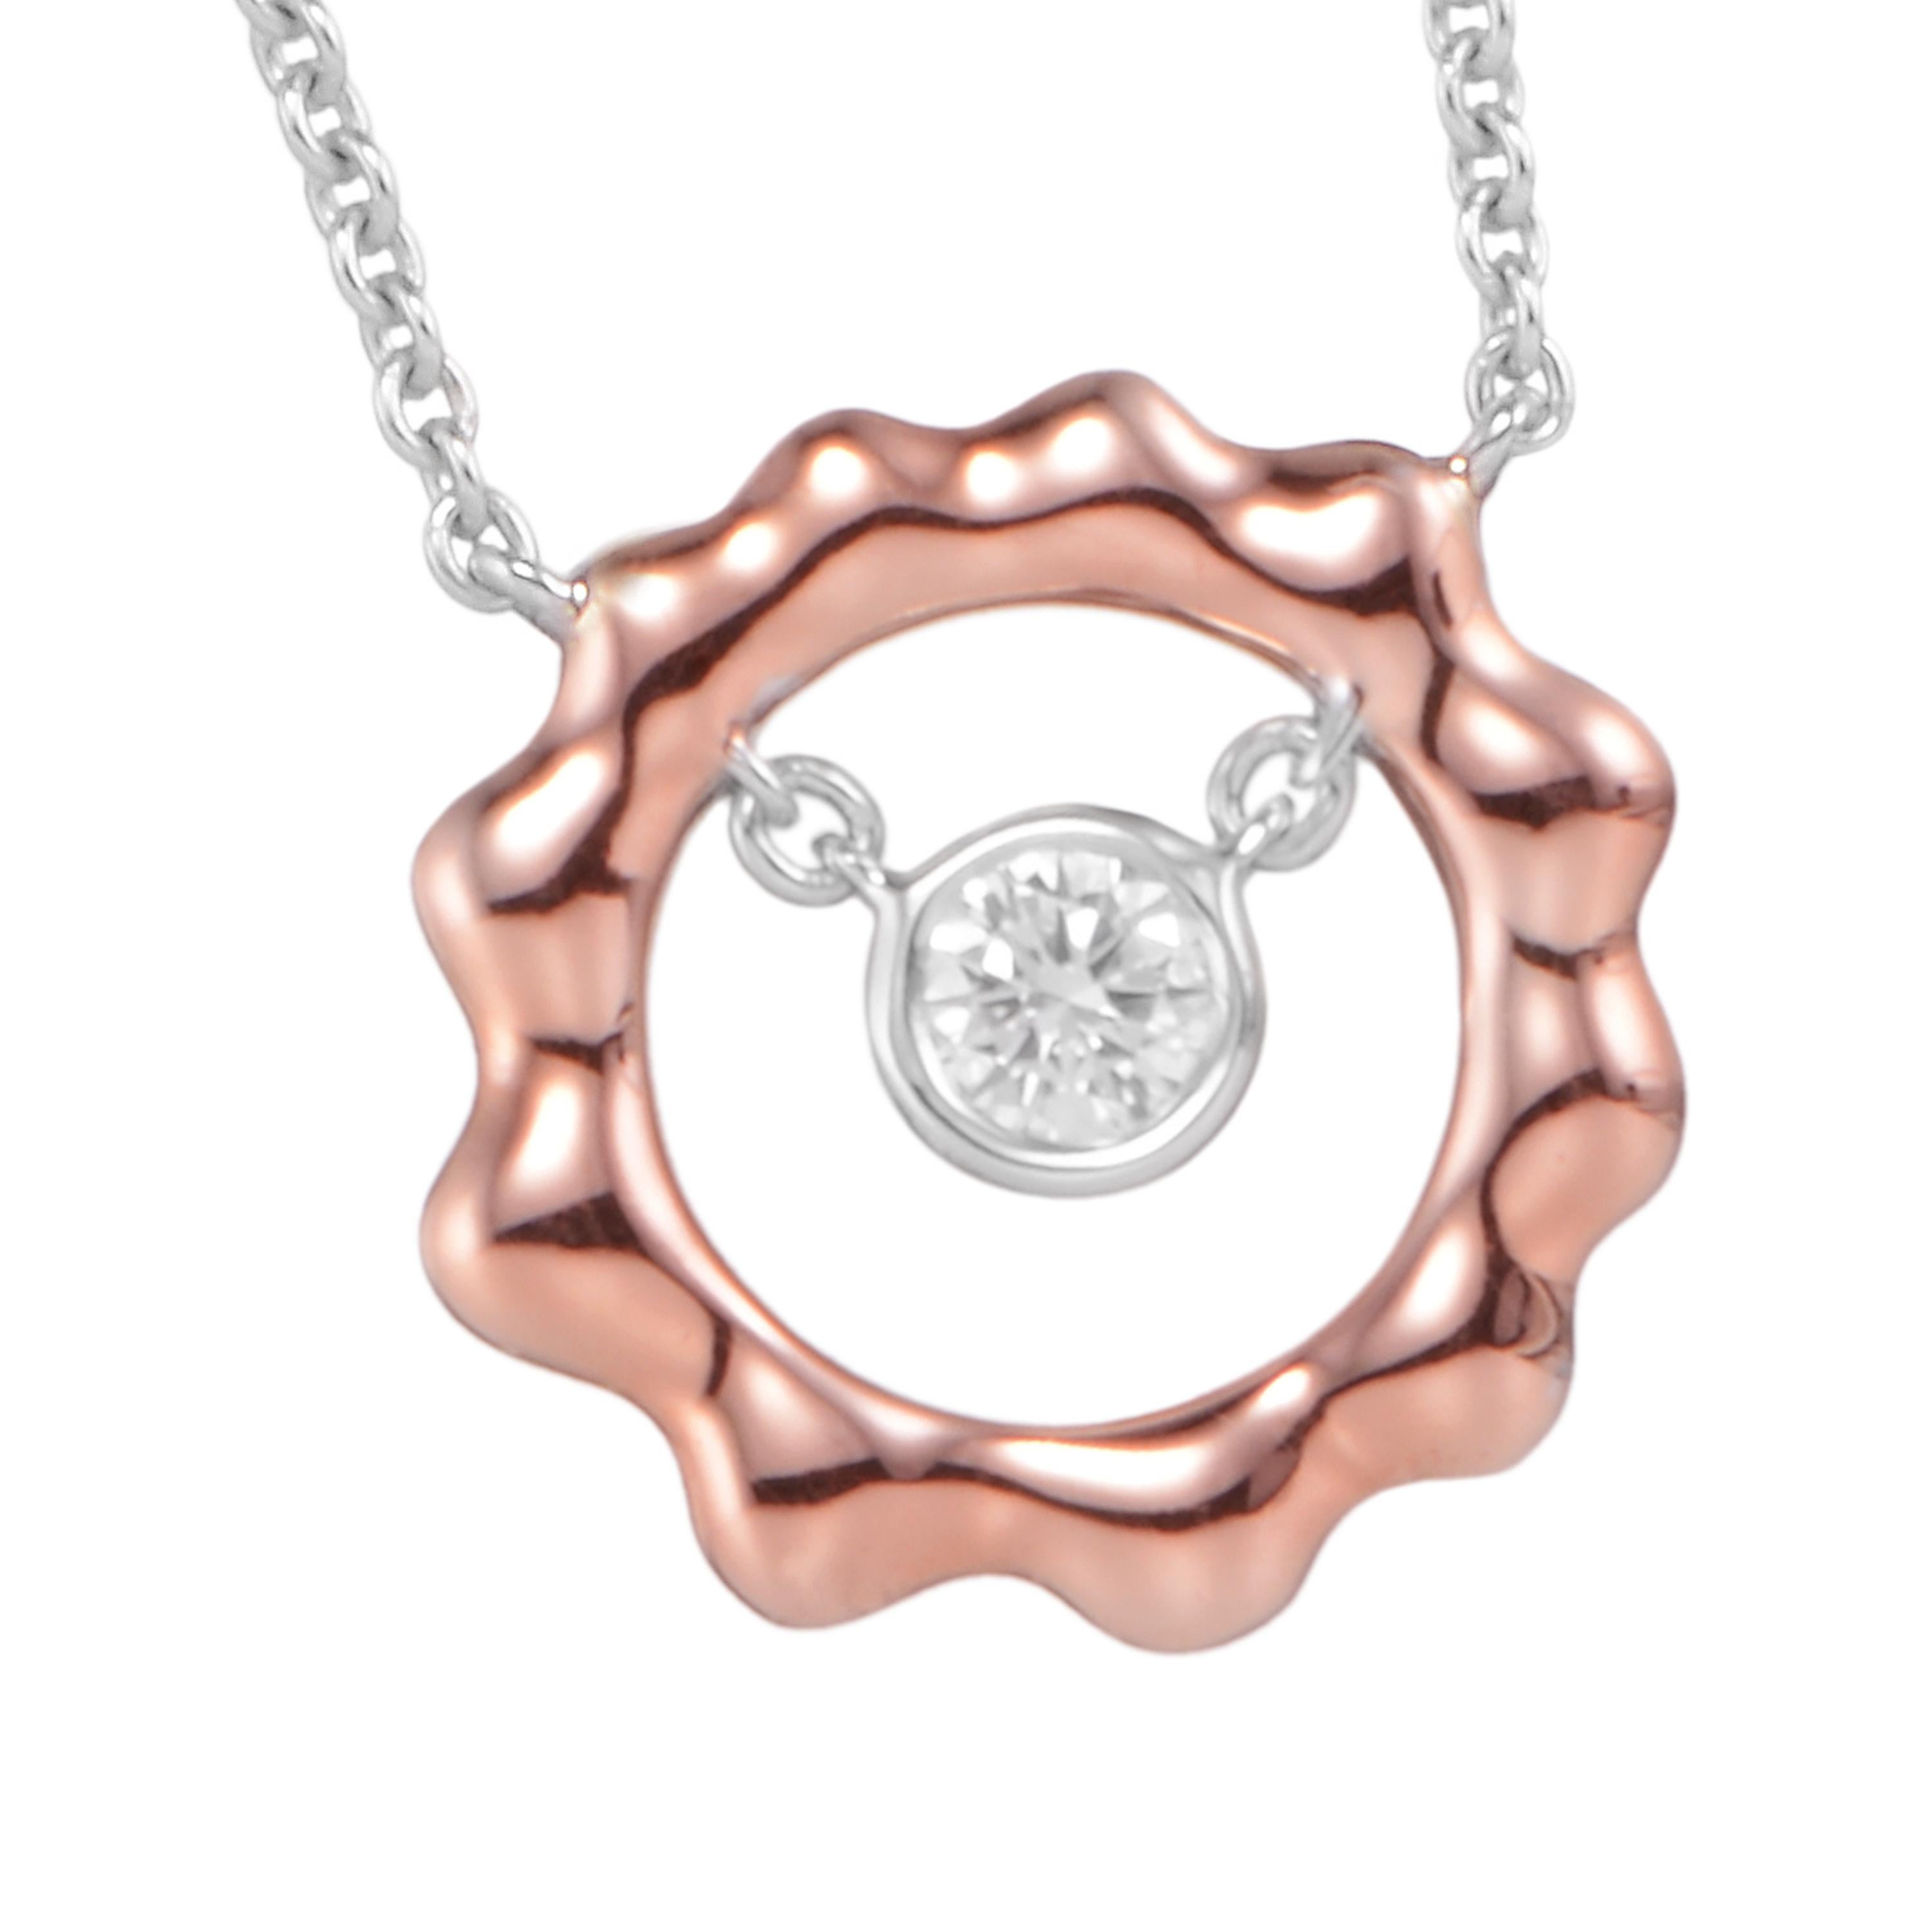 Cast in the shape of the sun, Butani's pendant necklace is handcrafted from 18-karat rose and white gold and has a 0.26 carat brilliant-cut round diamond center illuminated by a rose gold sun silhouette.  Wear it solo or layered with other pieces. 